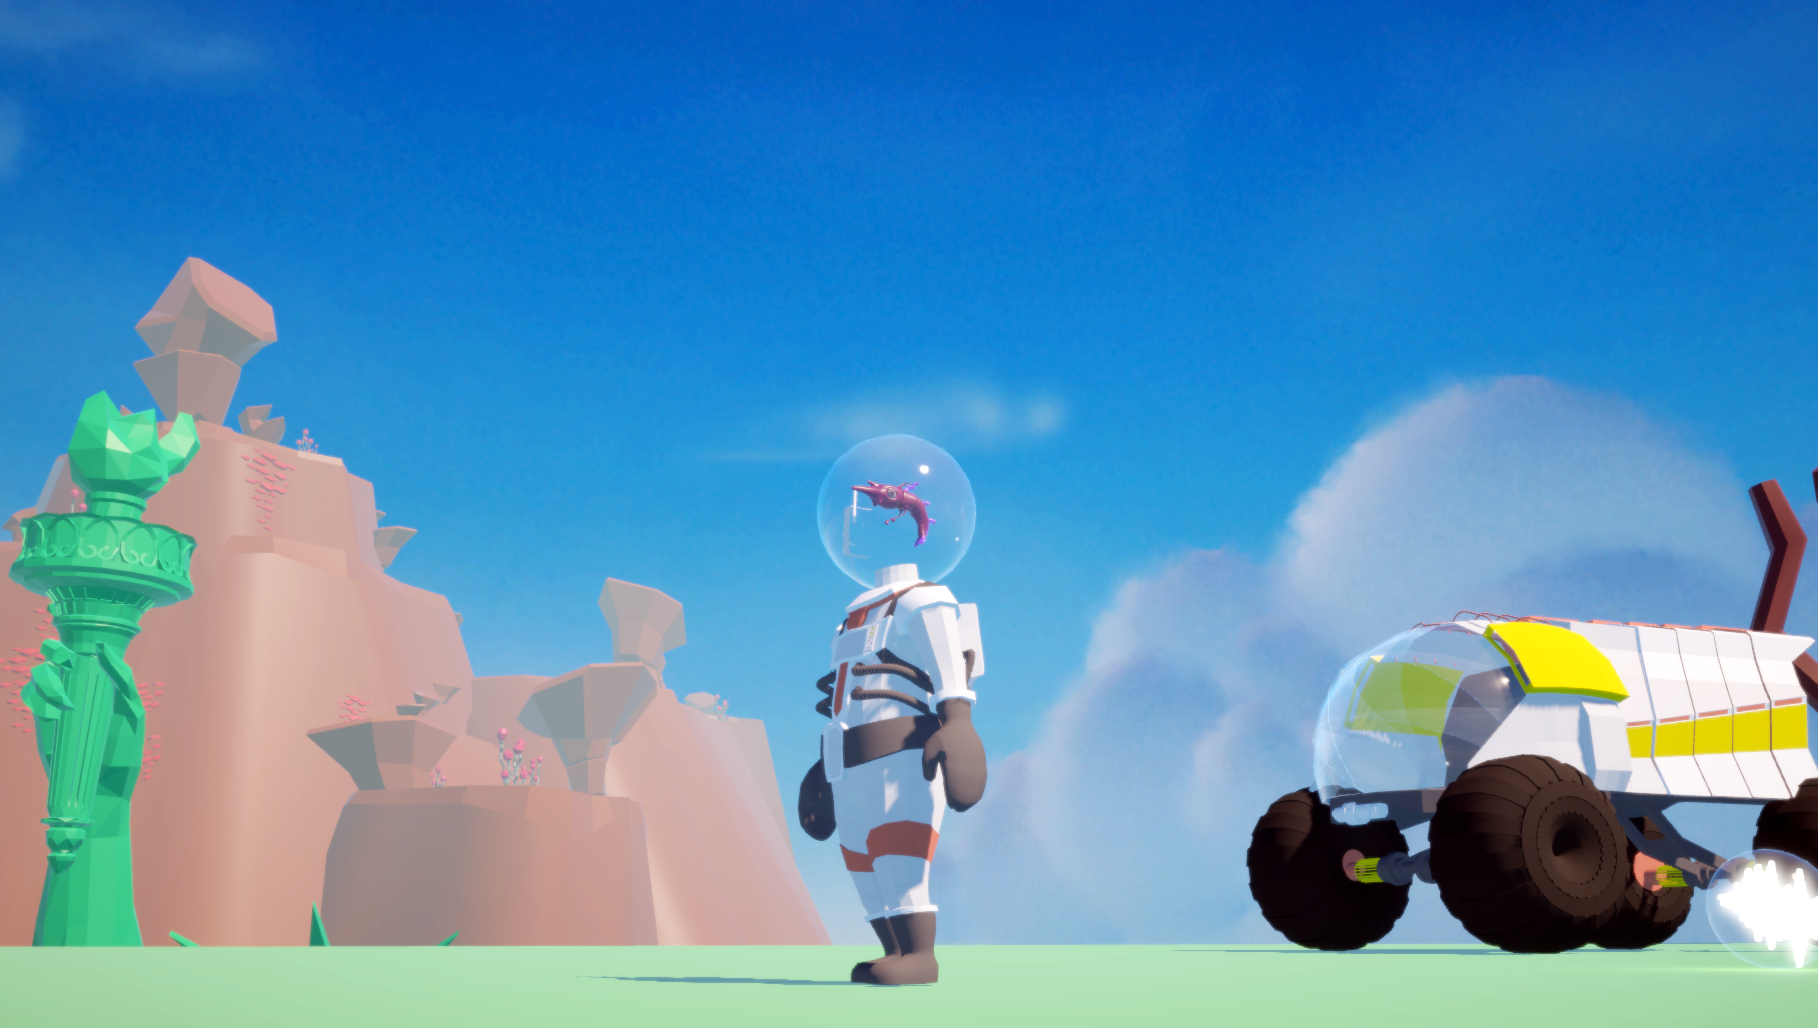 screenshot of video game, depicting lowpoly styled astronaut, wearing space suit, standing on desert terrain, with rover and arm of statue of liberty in background